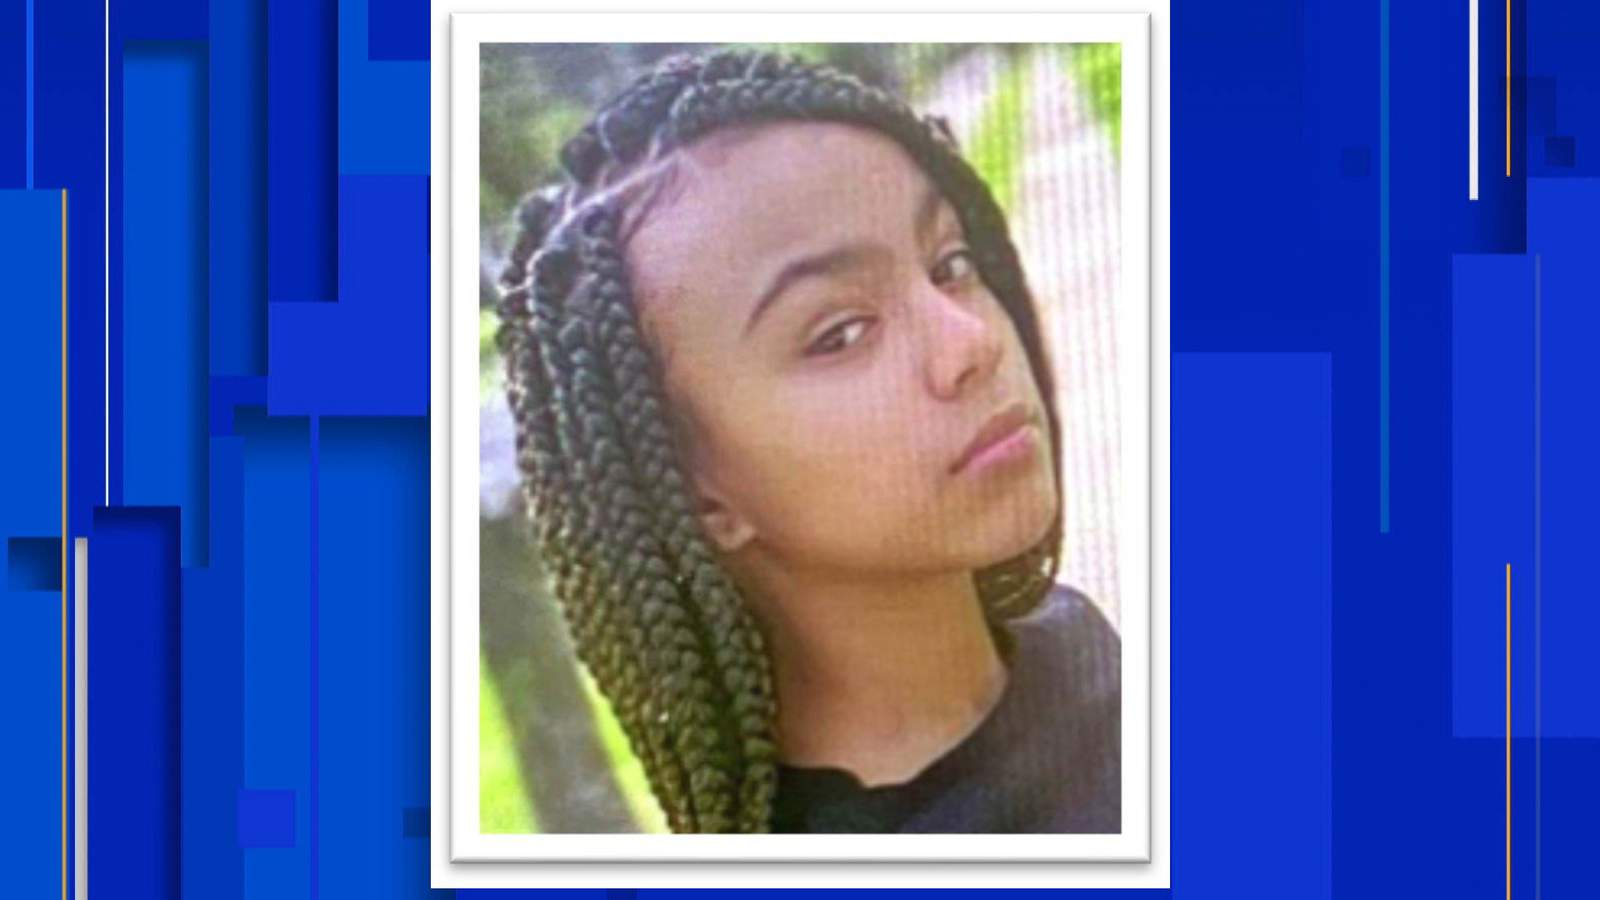 Oakland County officials want help locating a missing 14-year-old girl